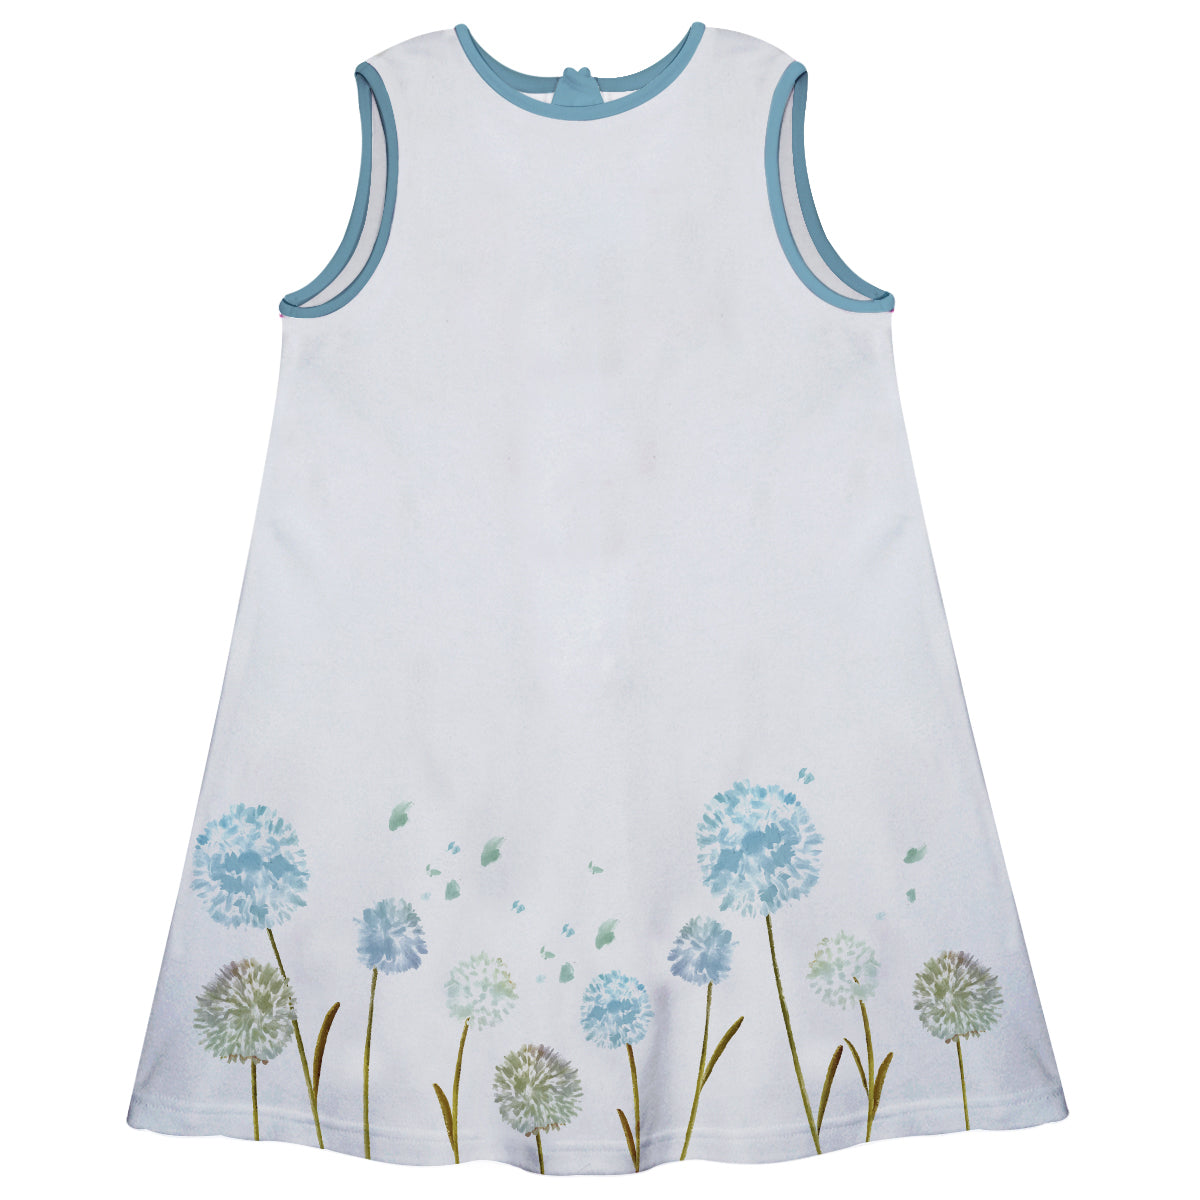 Floral Personalized Name White A Line Dress - Wimziy&Co.